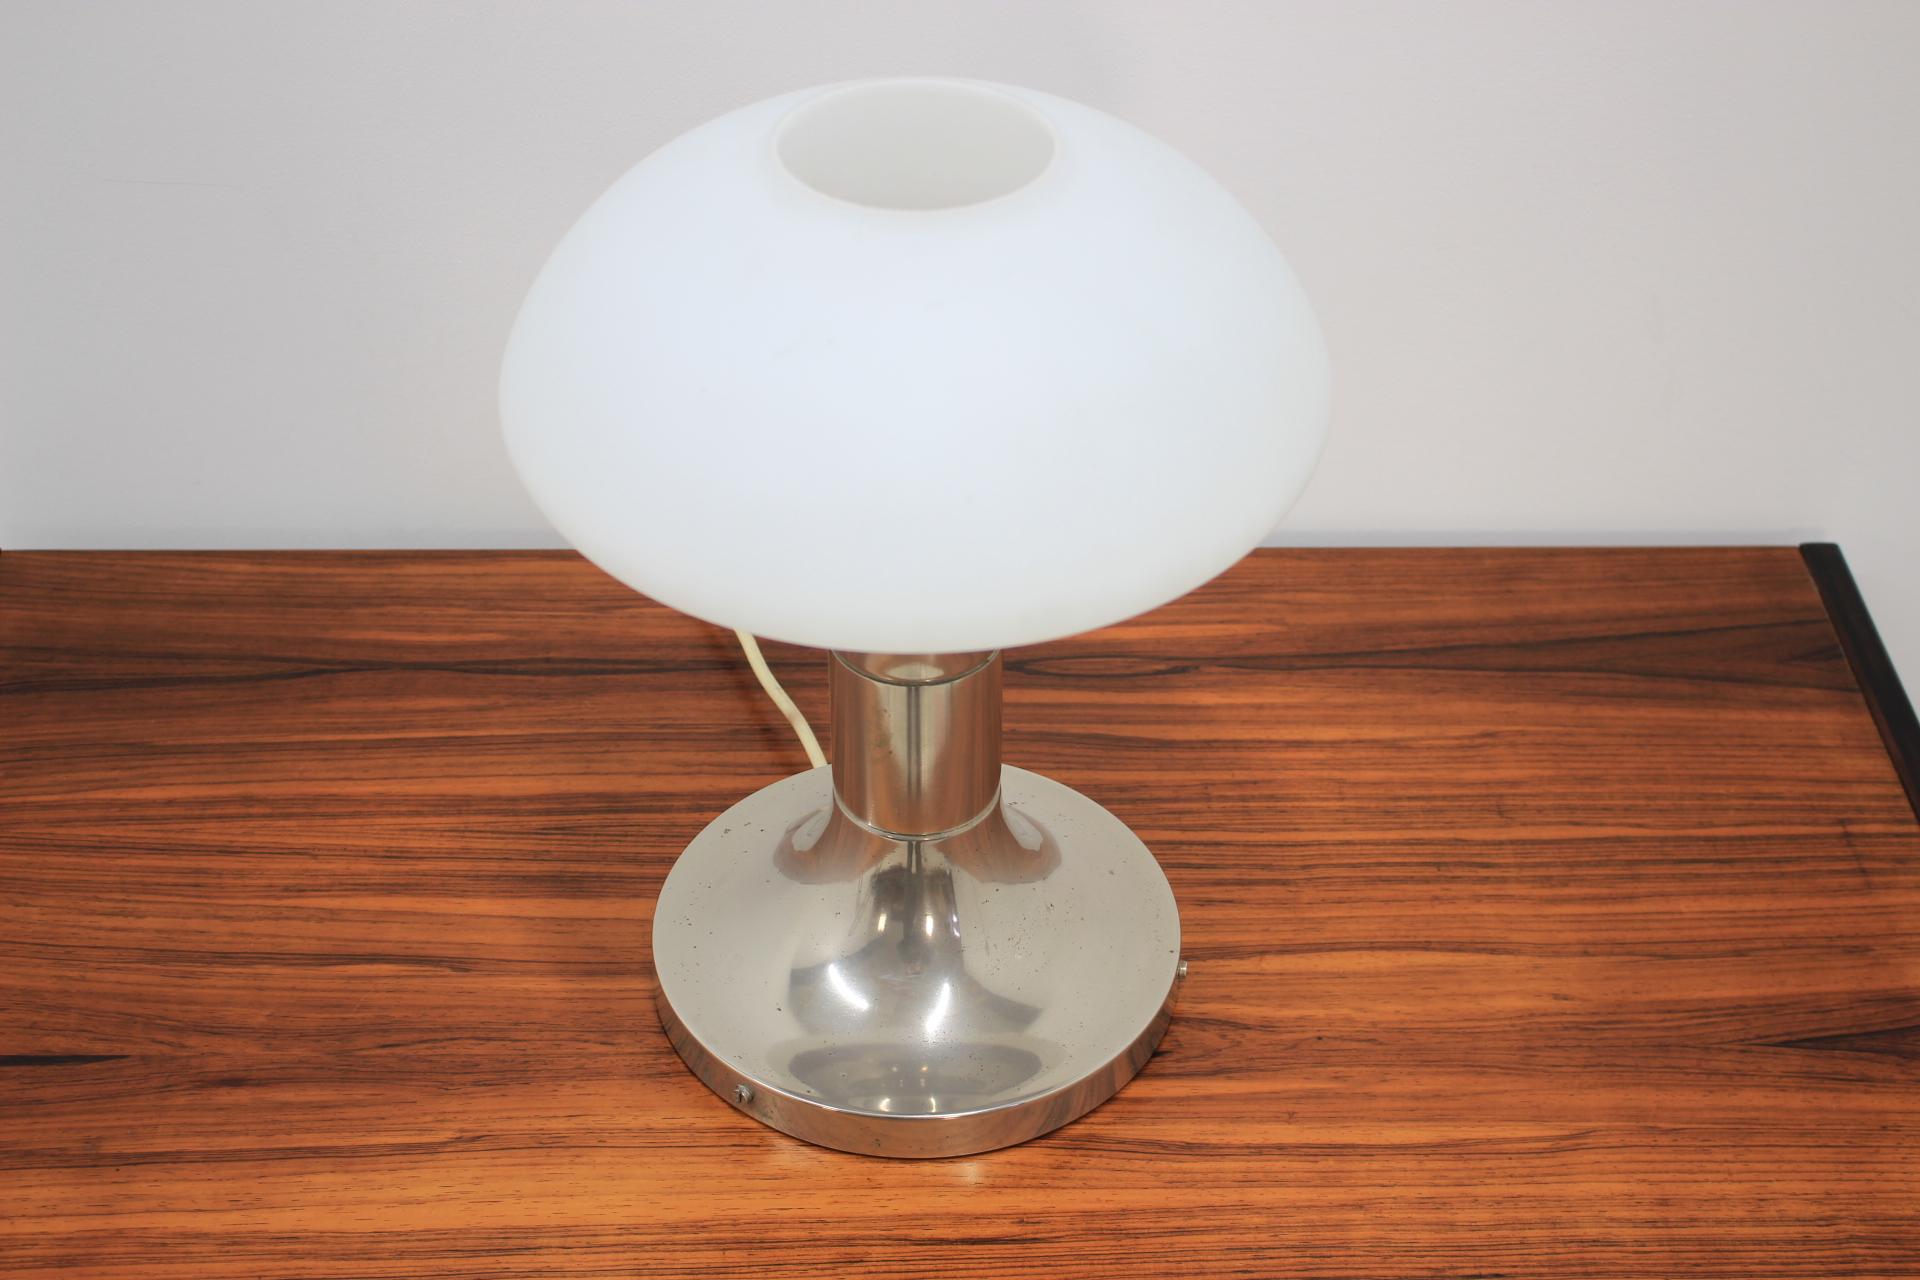 - Made in Germany
- Made of metal, milk glass
- Glass has wear signs of use 
- Original condition.